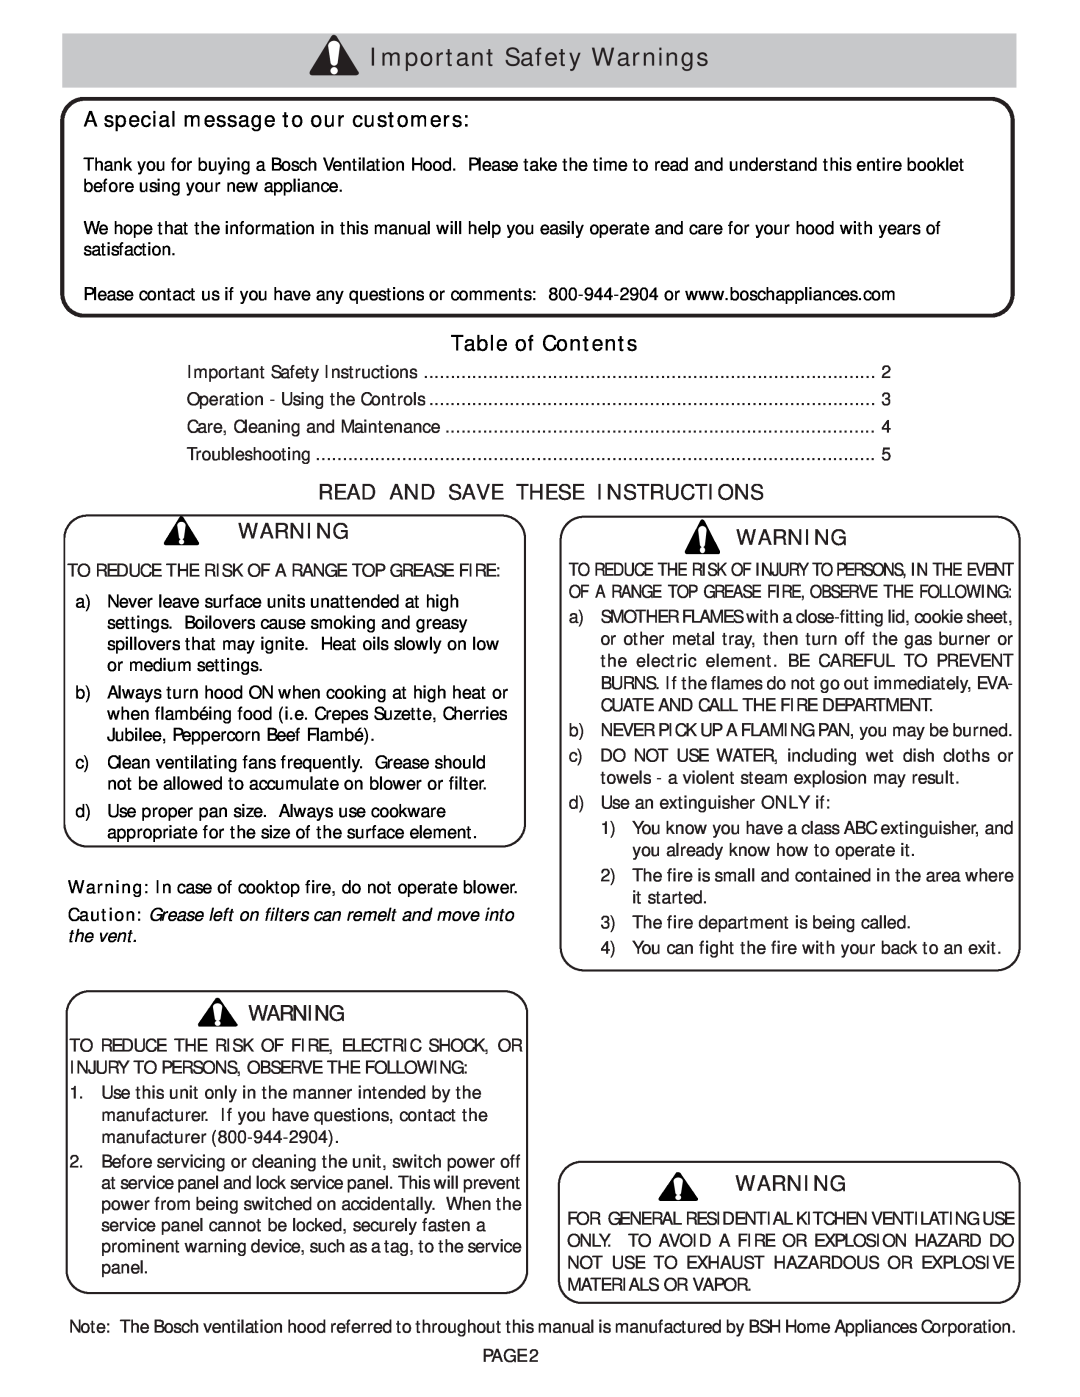 Bosch Appliances DAH95, DAH94 manual Important Safety Warnings, Read And Save These Instructions, Table of Contents, Page 